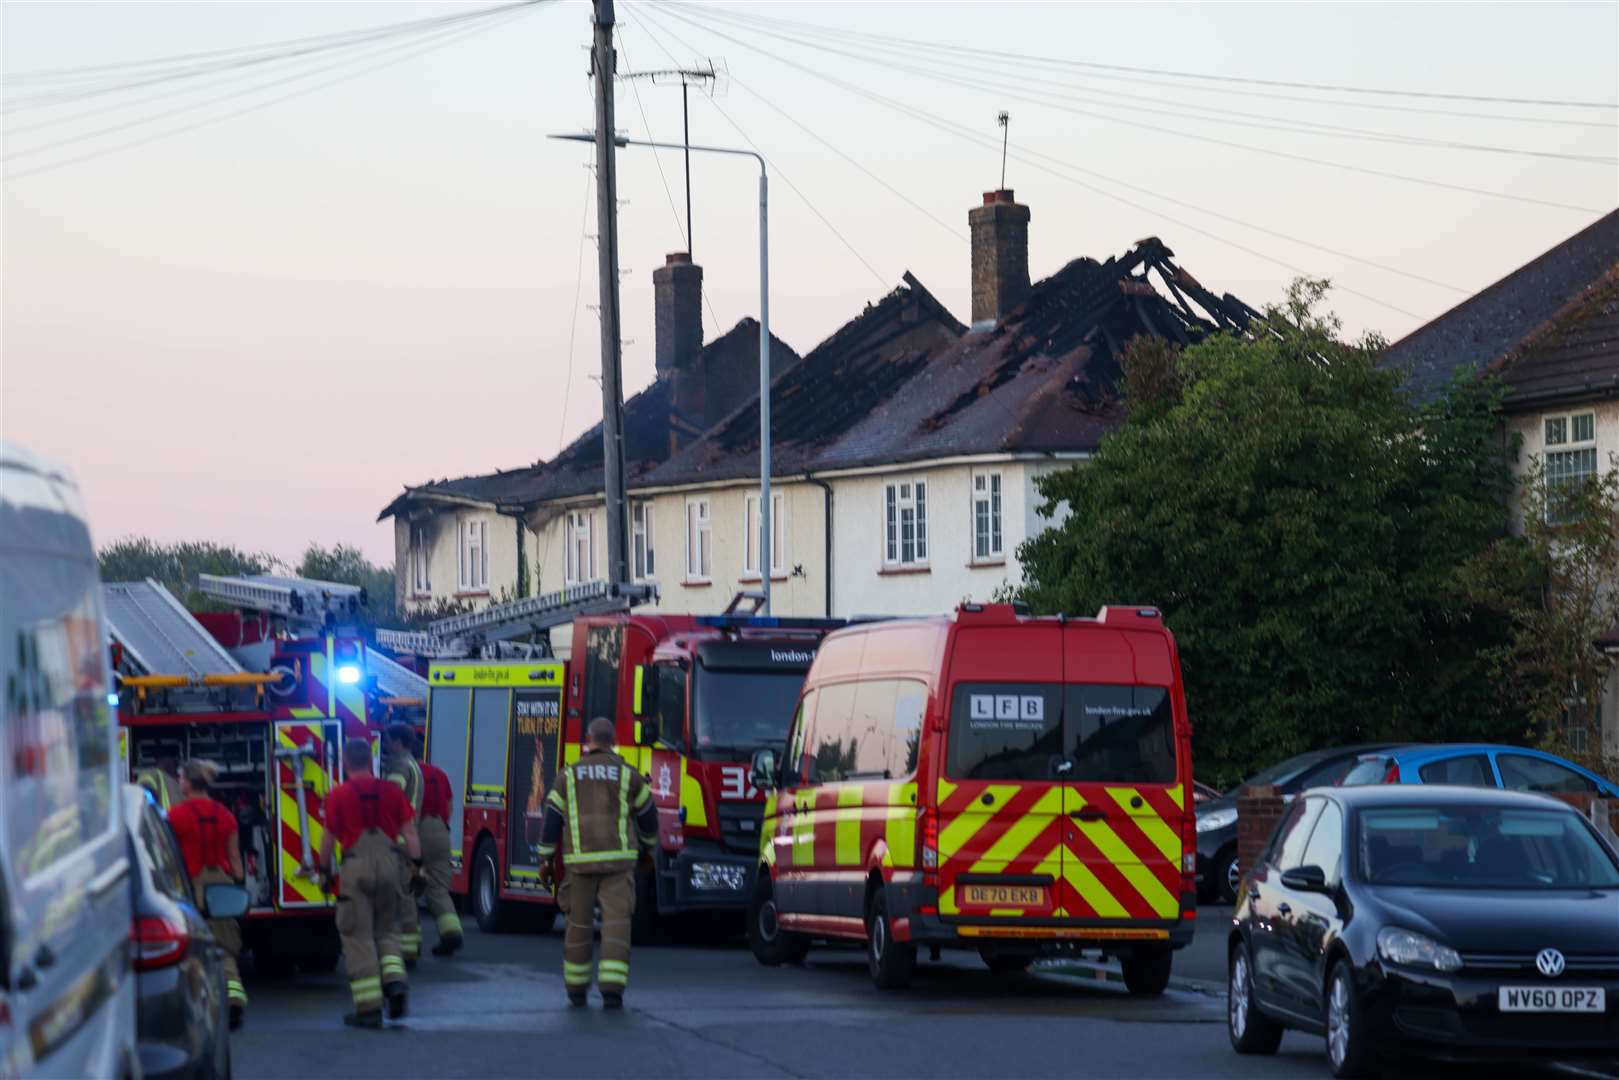 Around 60 firefighters tackled a fire on Crayford Way in Crayford. Photo: UKNIP